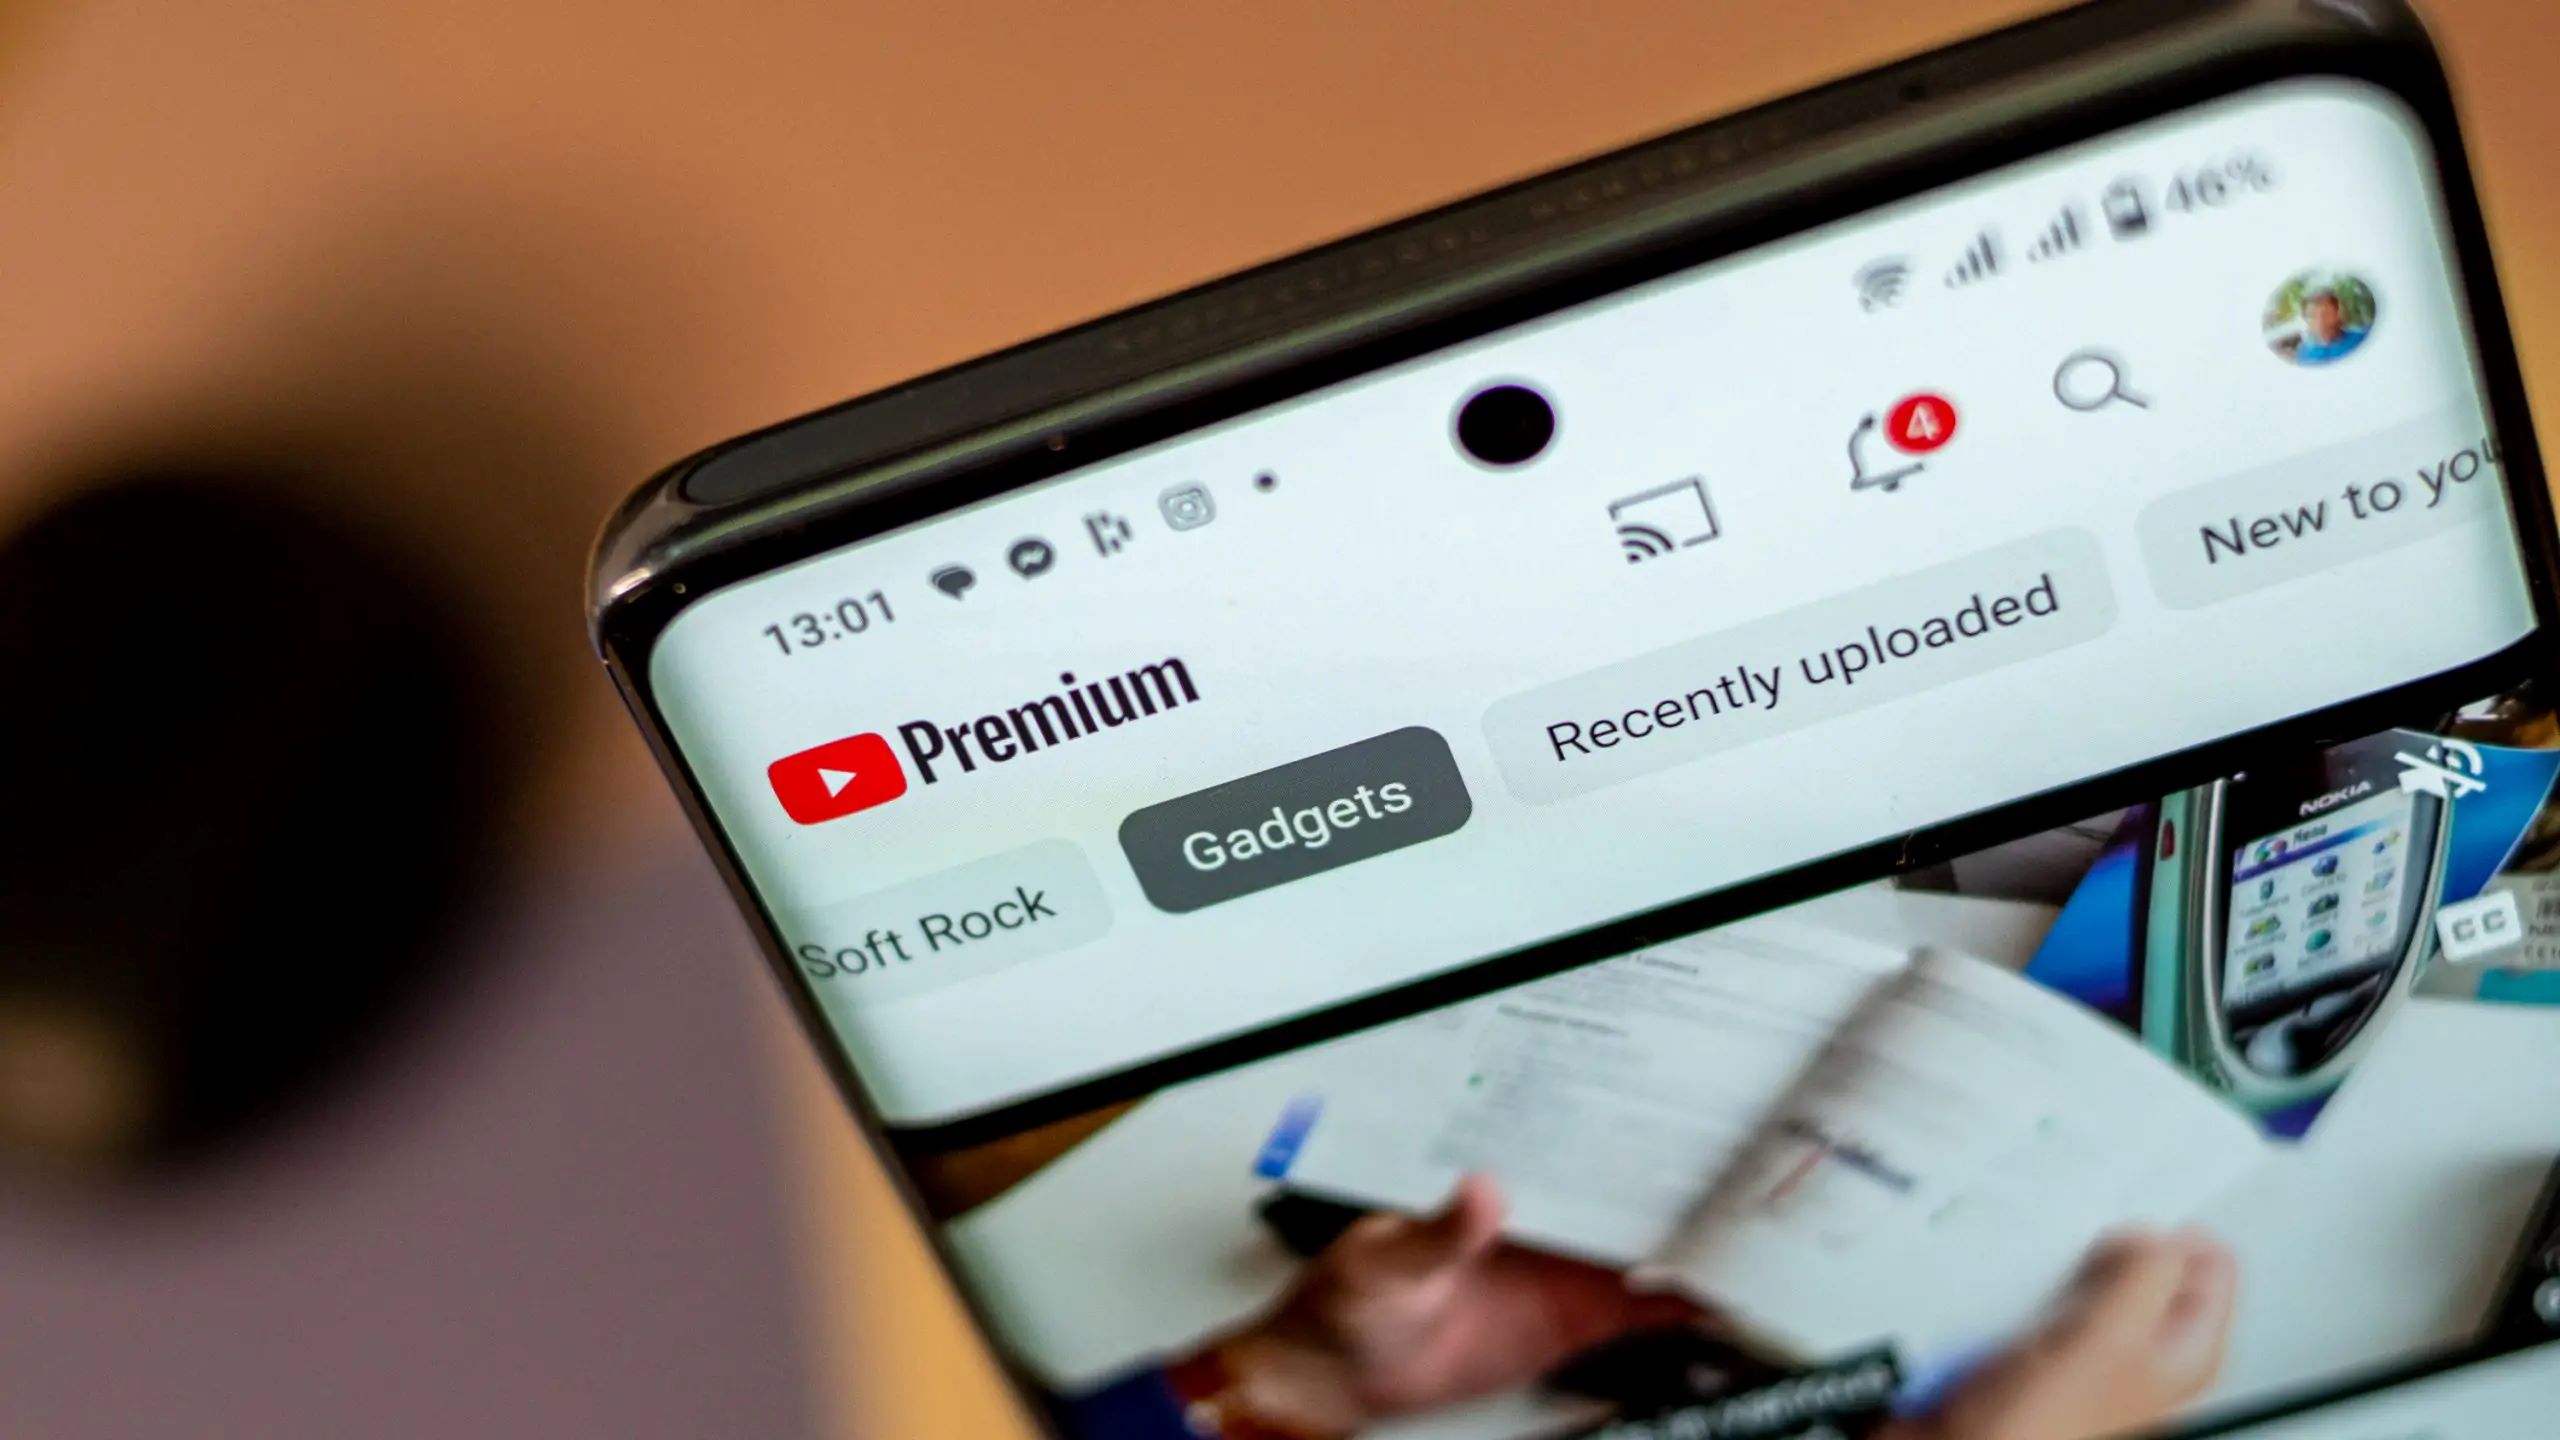 How To Stop YouTube Premium From Turning Off When My Phone Locks